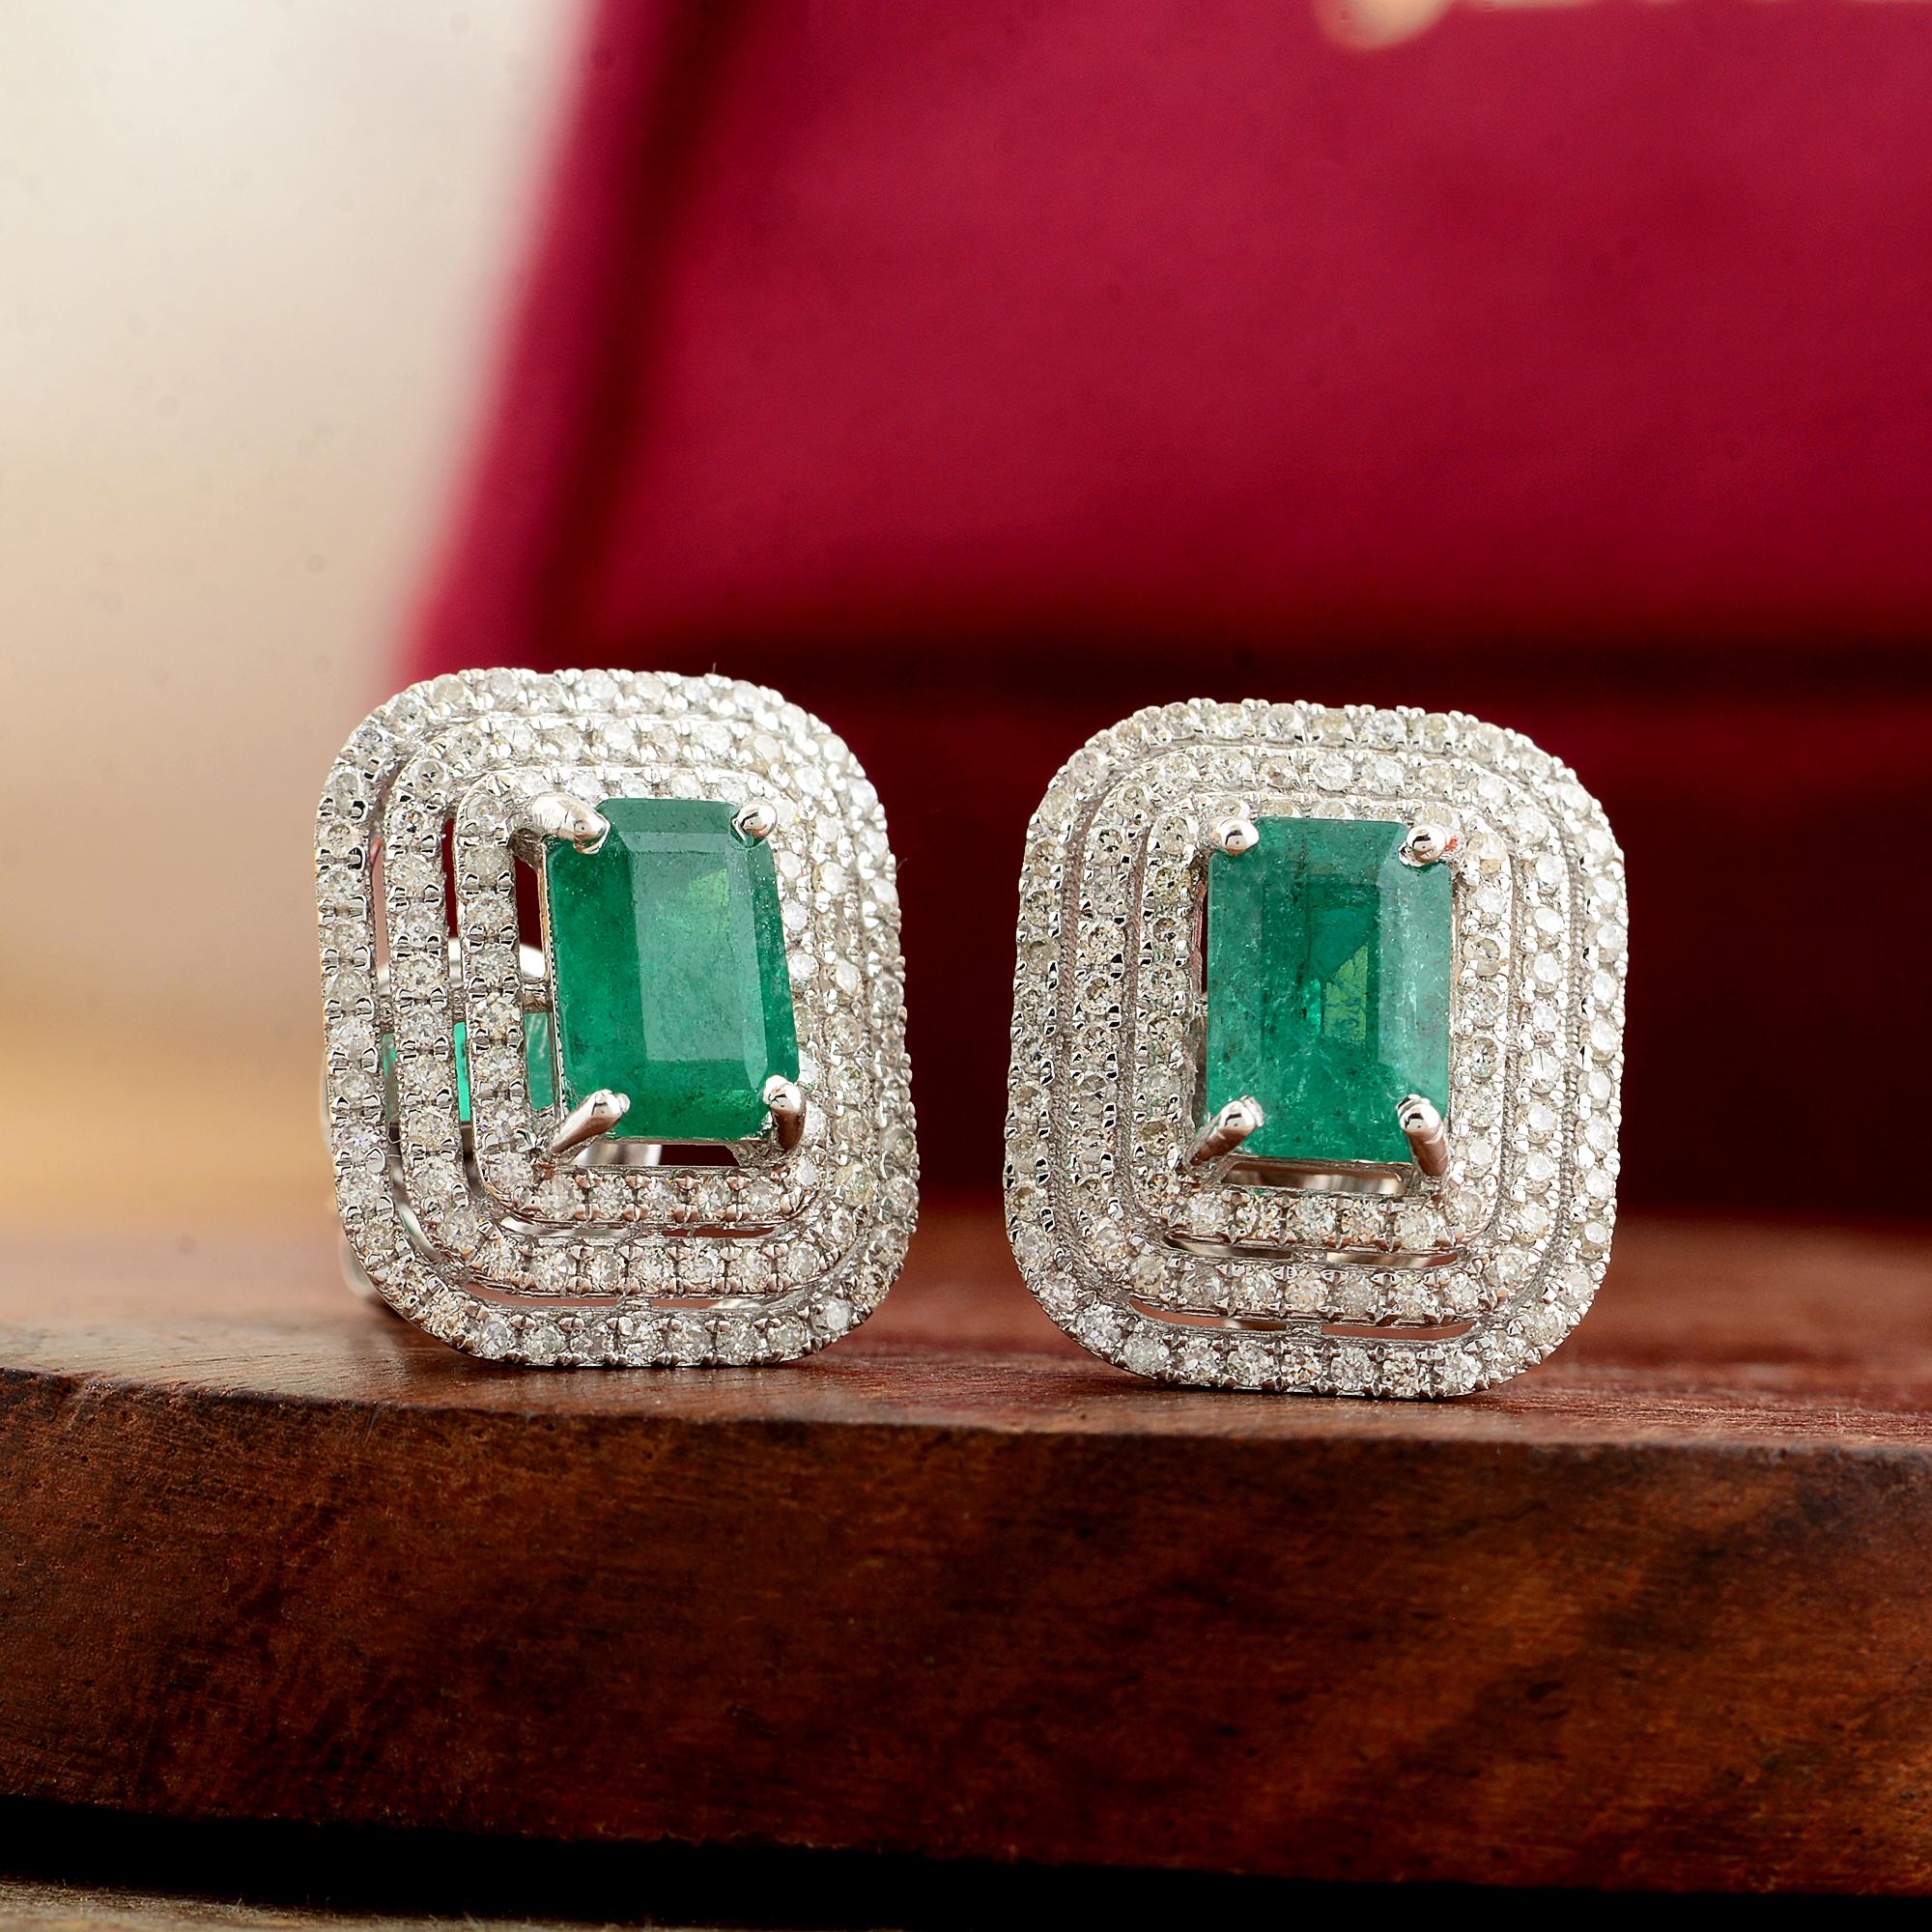 Modern Natural Emerald Gemstone Stud Earrings Diamond Pave Solid 18k White Gold Jewelry For Sale